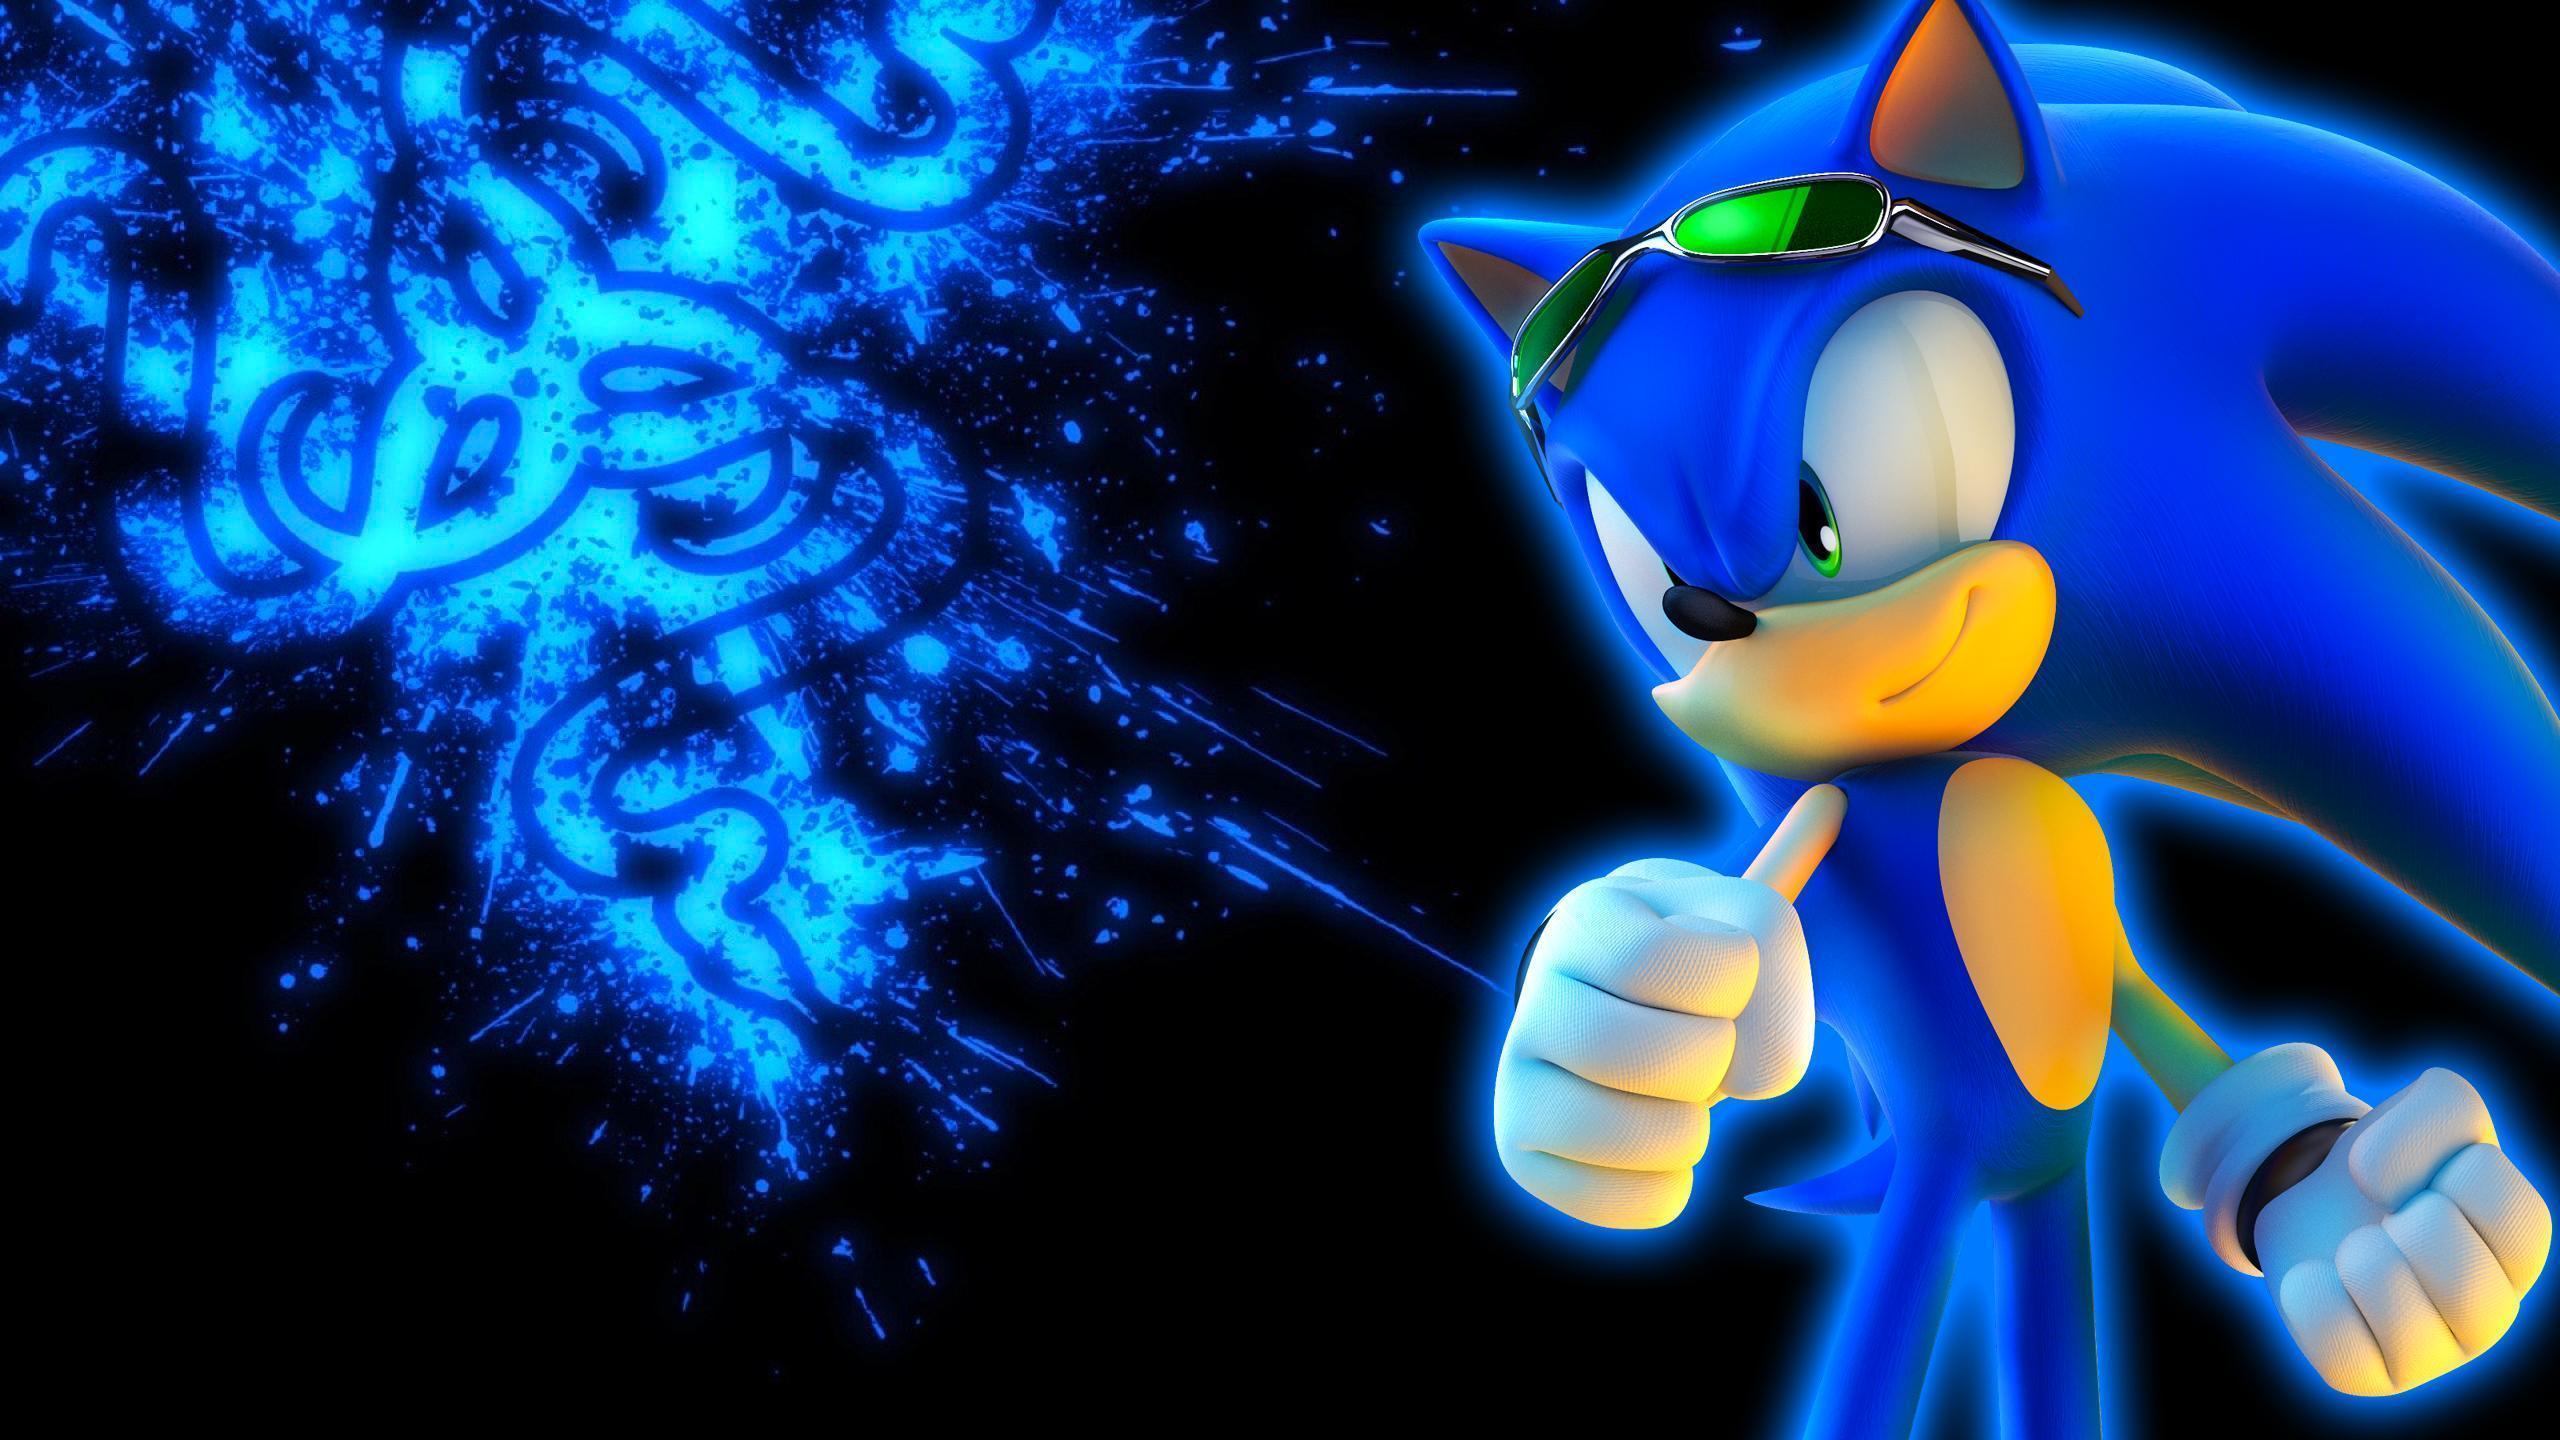 Sonic Backgrounds - Wallpaper Cave